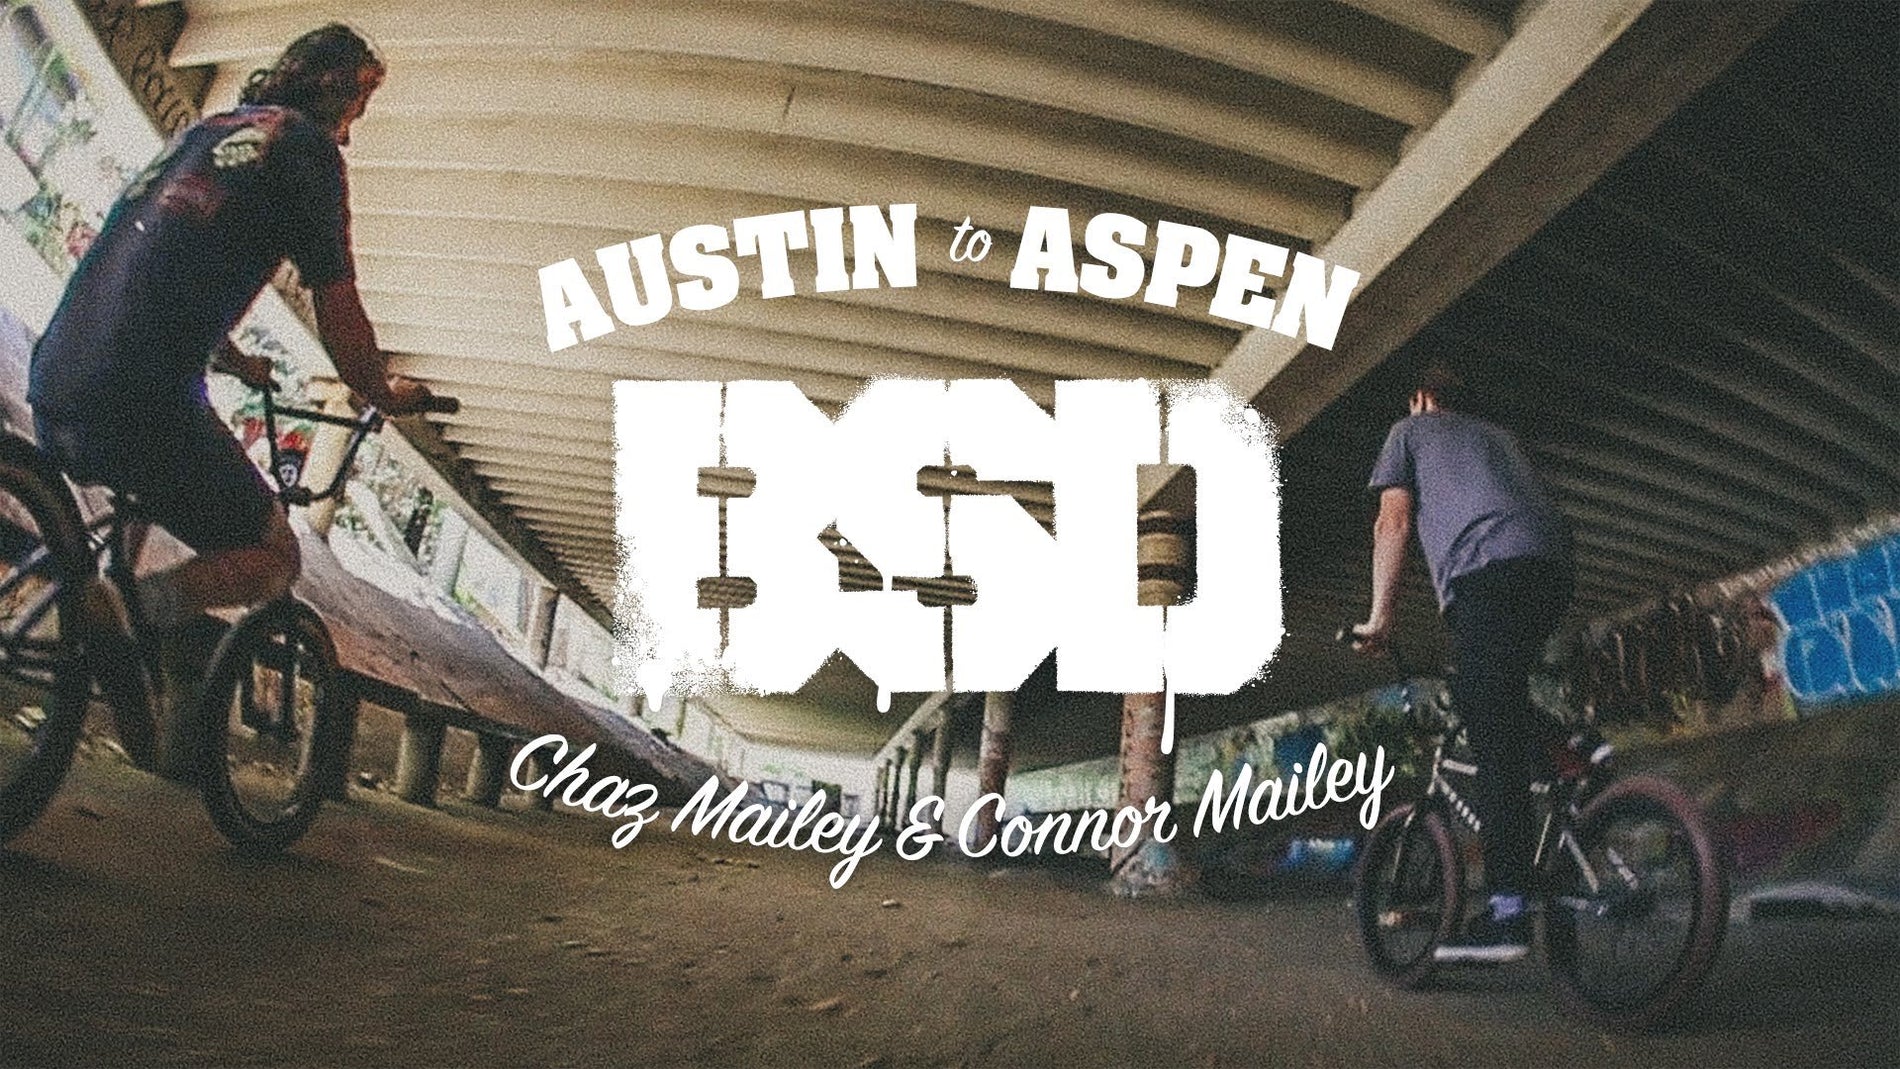 Chaz Mailey & Connor Mailey - Austin to Aspen